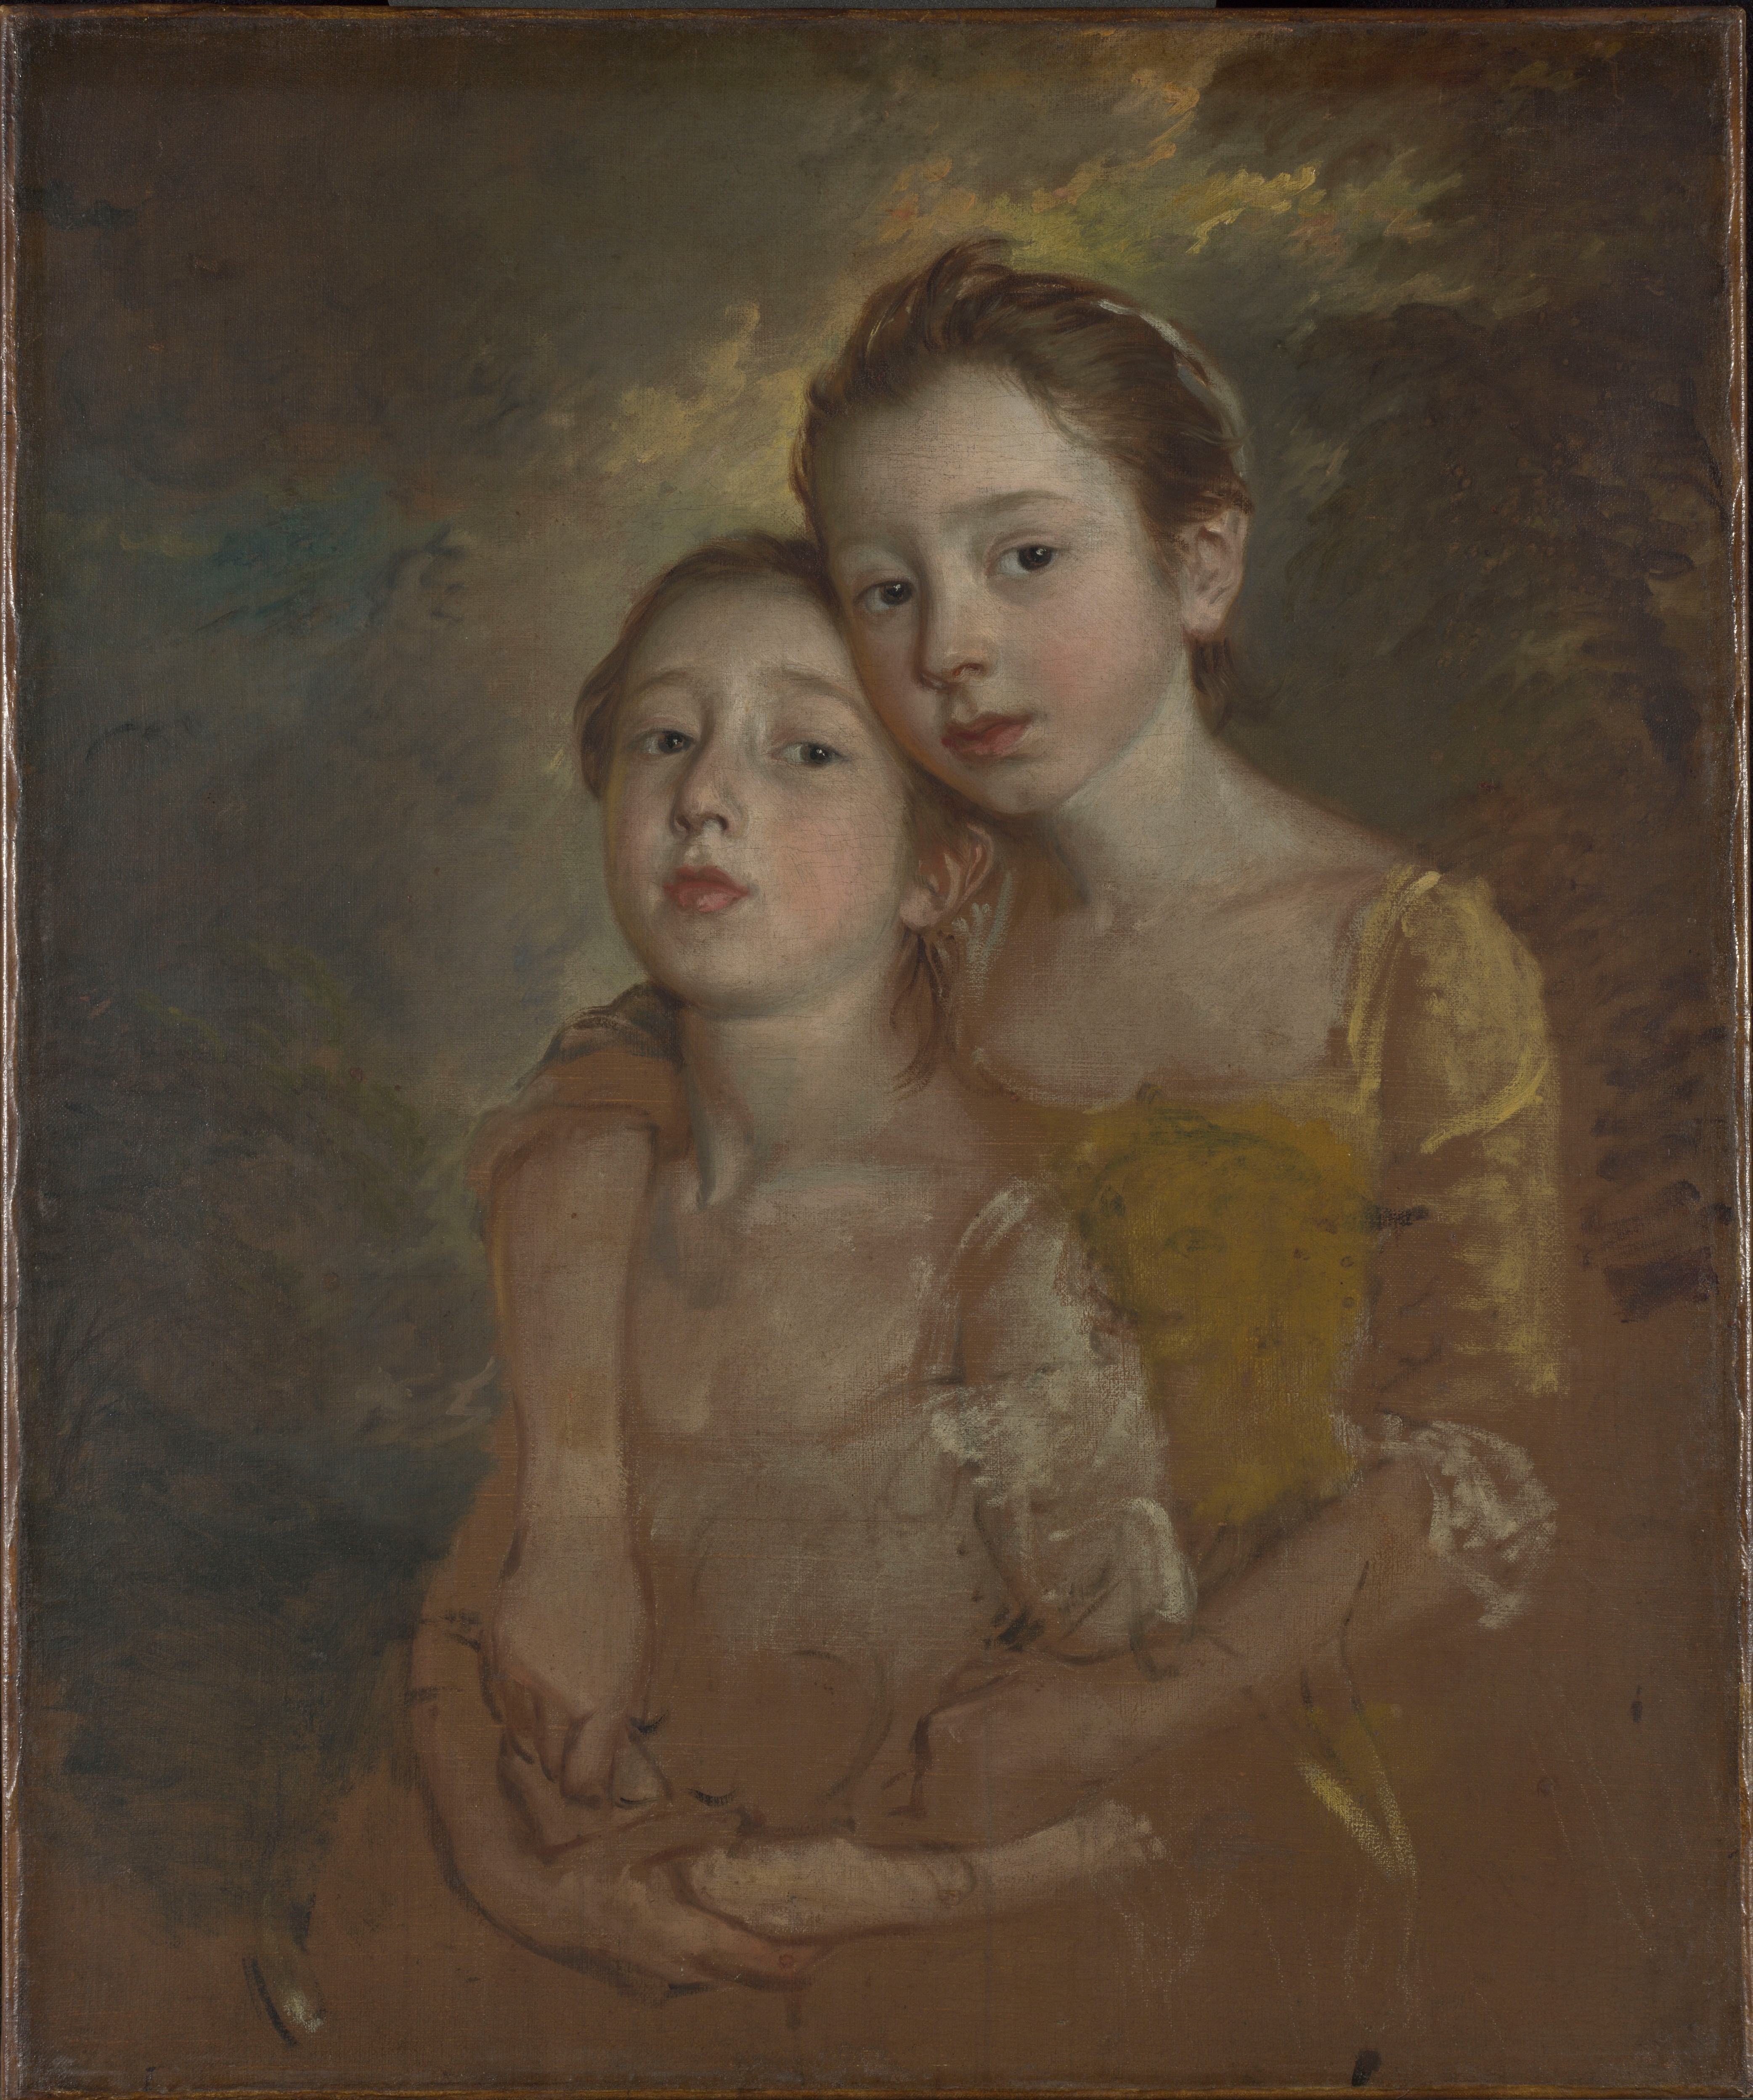 Painter's Daughters With A Cat , Thomas Gainsborough (The National Gallery, London)